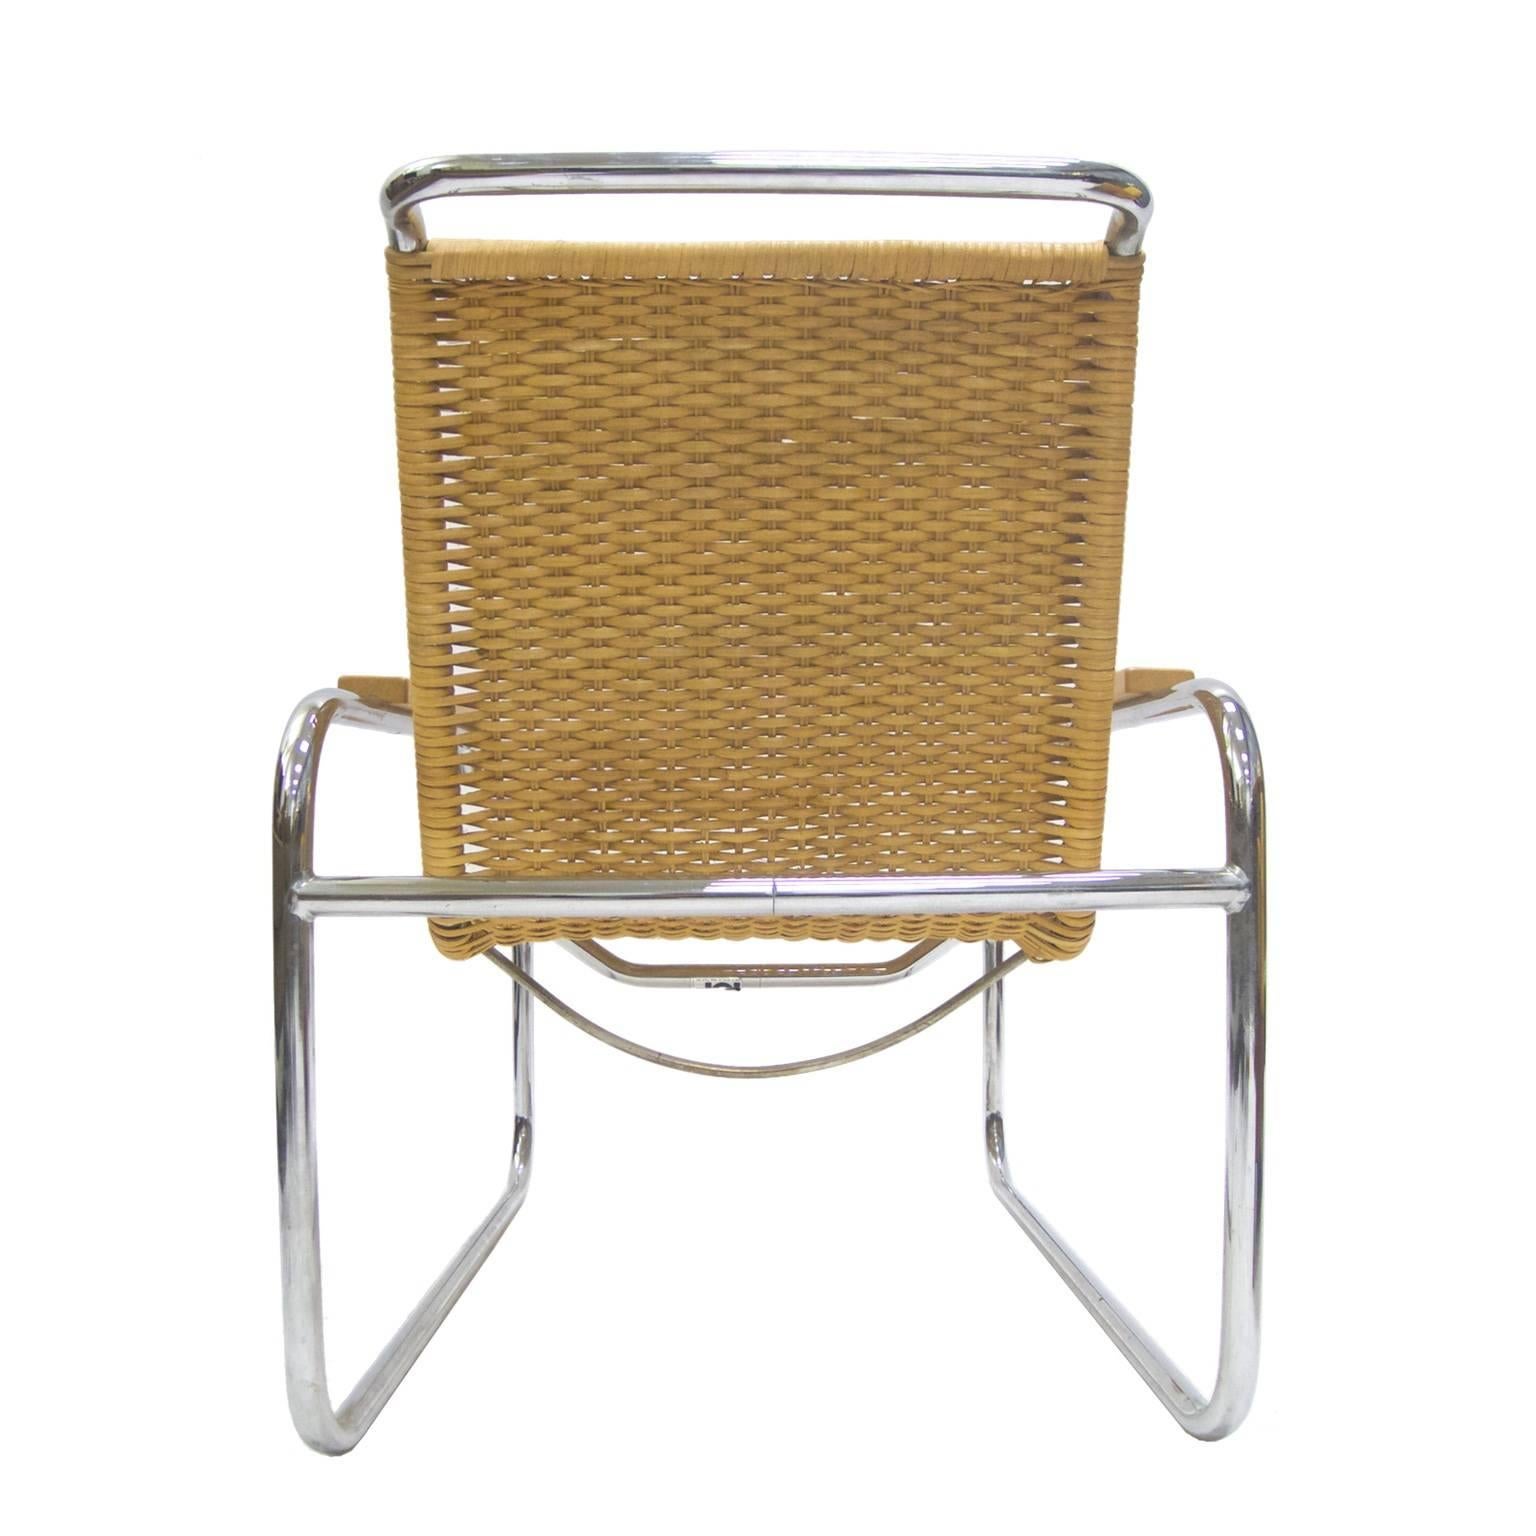 A beautiful example of a timeless Classic Marcel Breuer B 35 lounge chair. The chair was made by Thonet and distributed by ICF which was founded in 1962, ICF was one of the first companies to distribute furniture designed by international architects